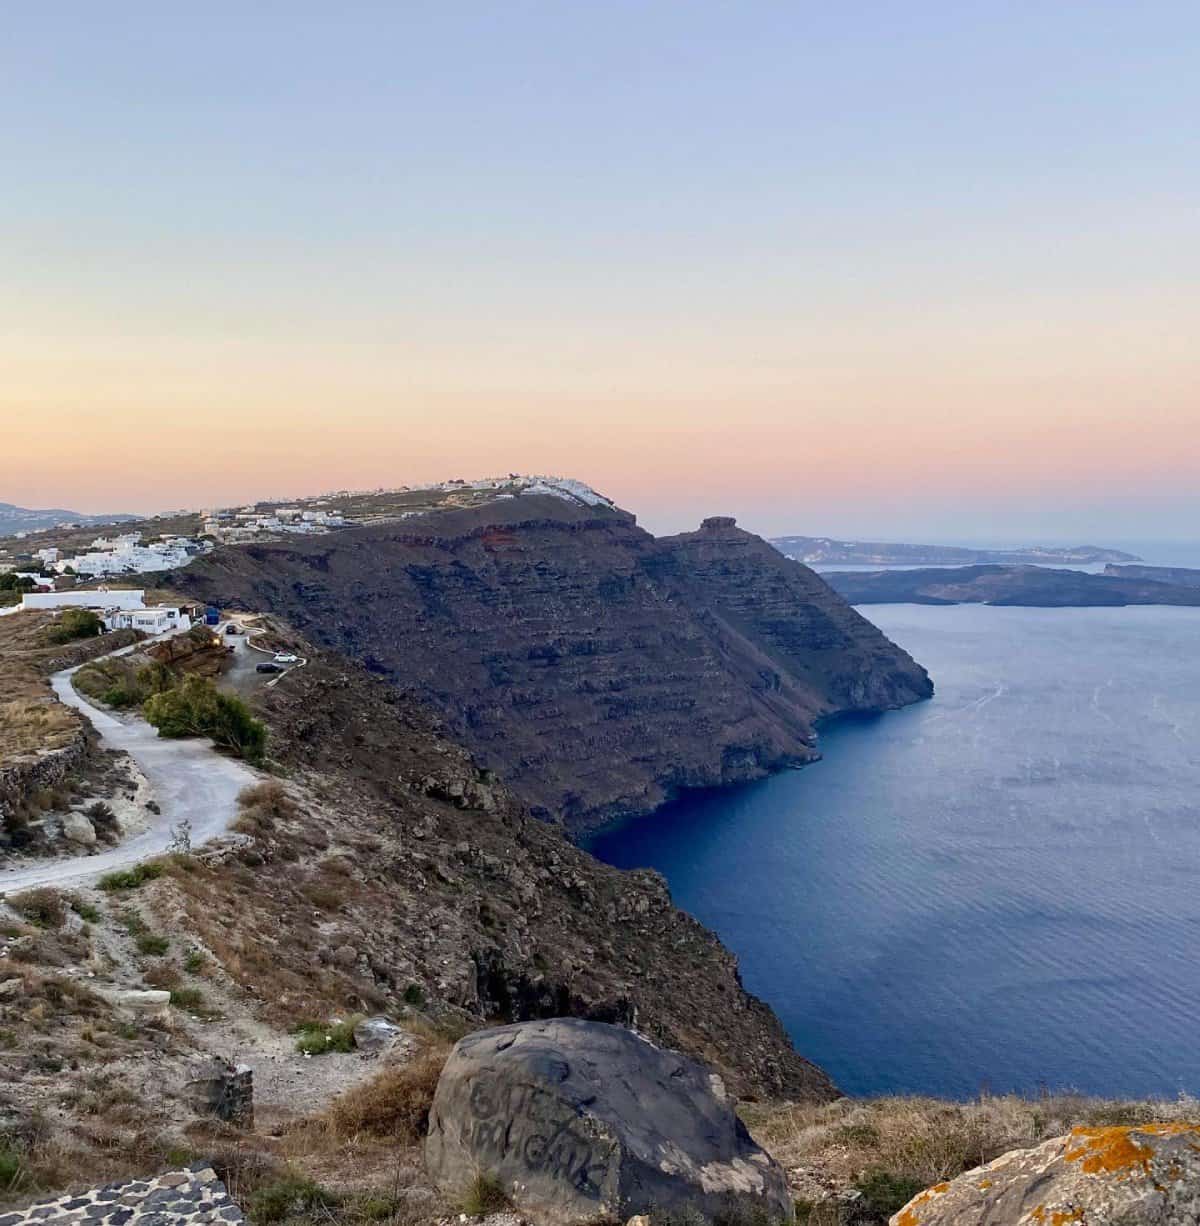 Santorini Hike at Sunrise: Imerovigli to Oia | Why you need to do the Fira to Oia hike in Santorini, where to begin, why sunrise is the best time, & a detailed guide to the famous Santorini hike. What to expect, tips, what to bring, & more! Santorini itinerary ideas, what to do in Santorini, what to do in Oia, Fira & more! Greece itinerary. #santorini #greece #hiking